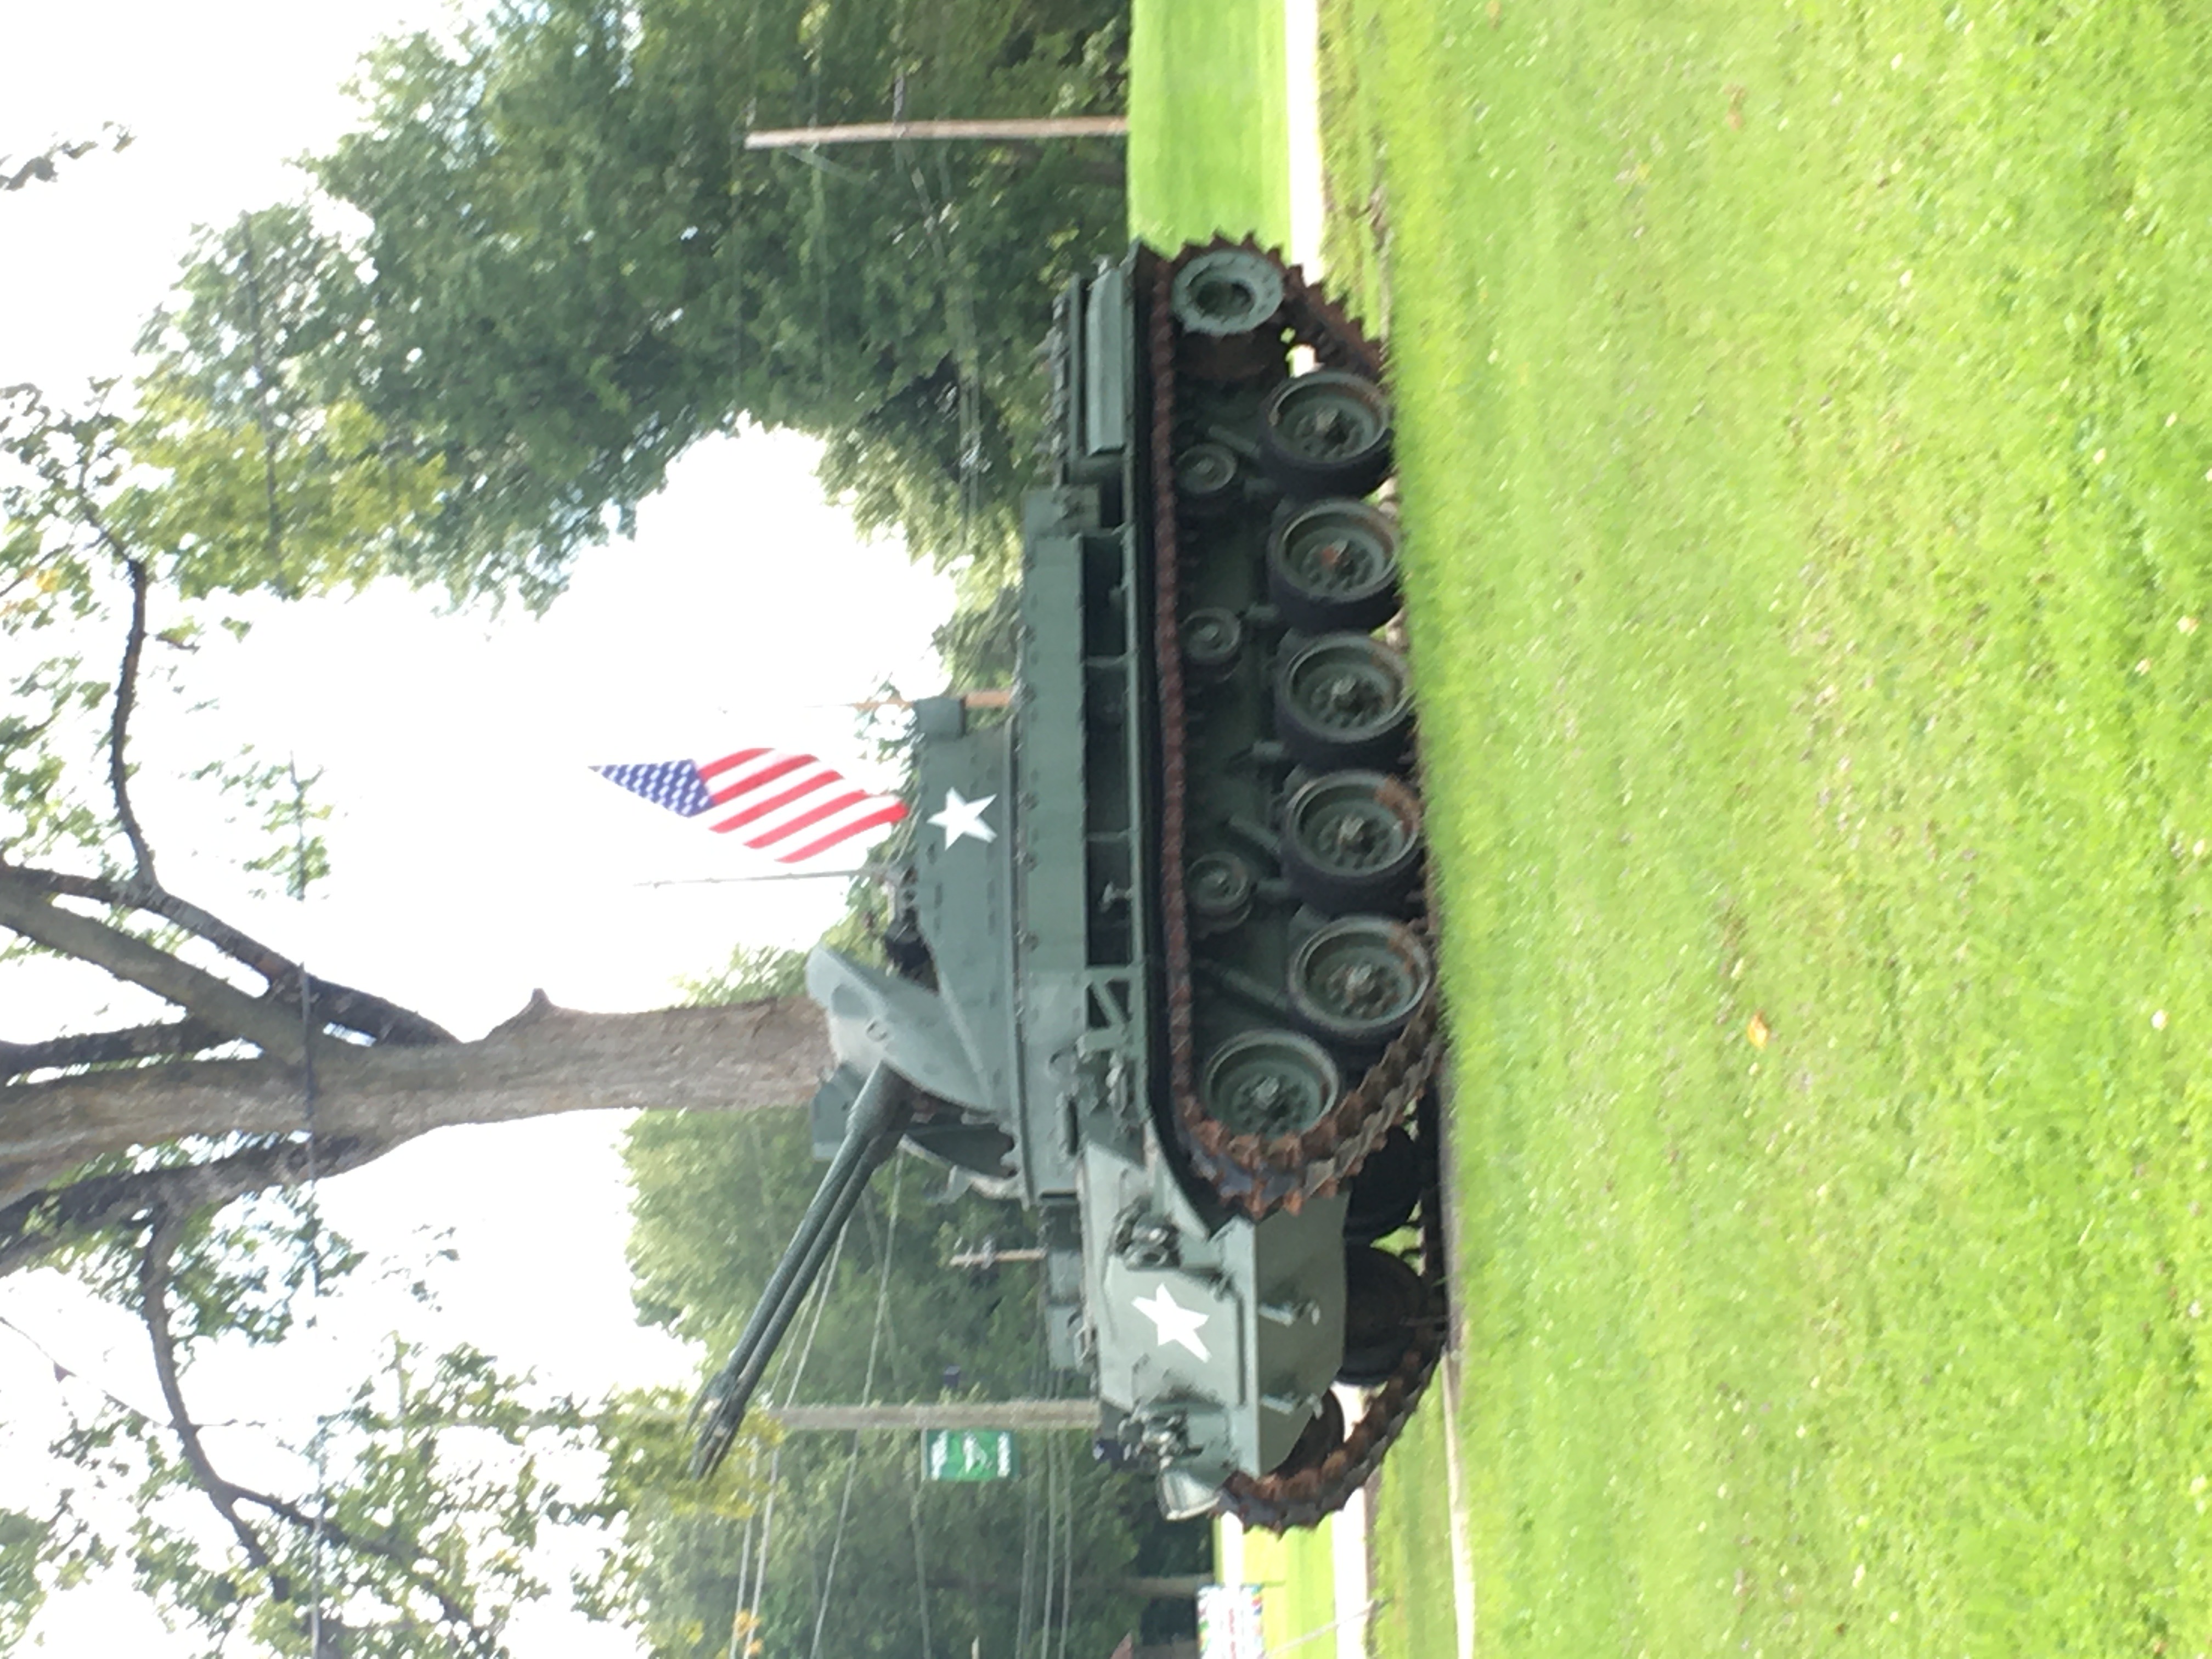 oh that reminds me of a M-42 Tank that is at a VFW about 8 miles from here